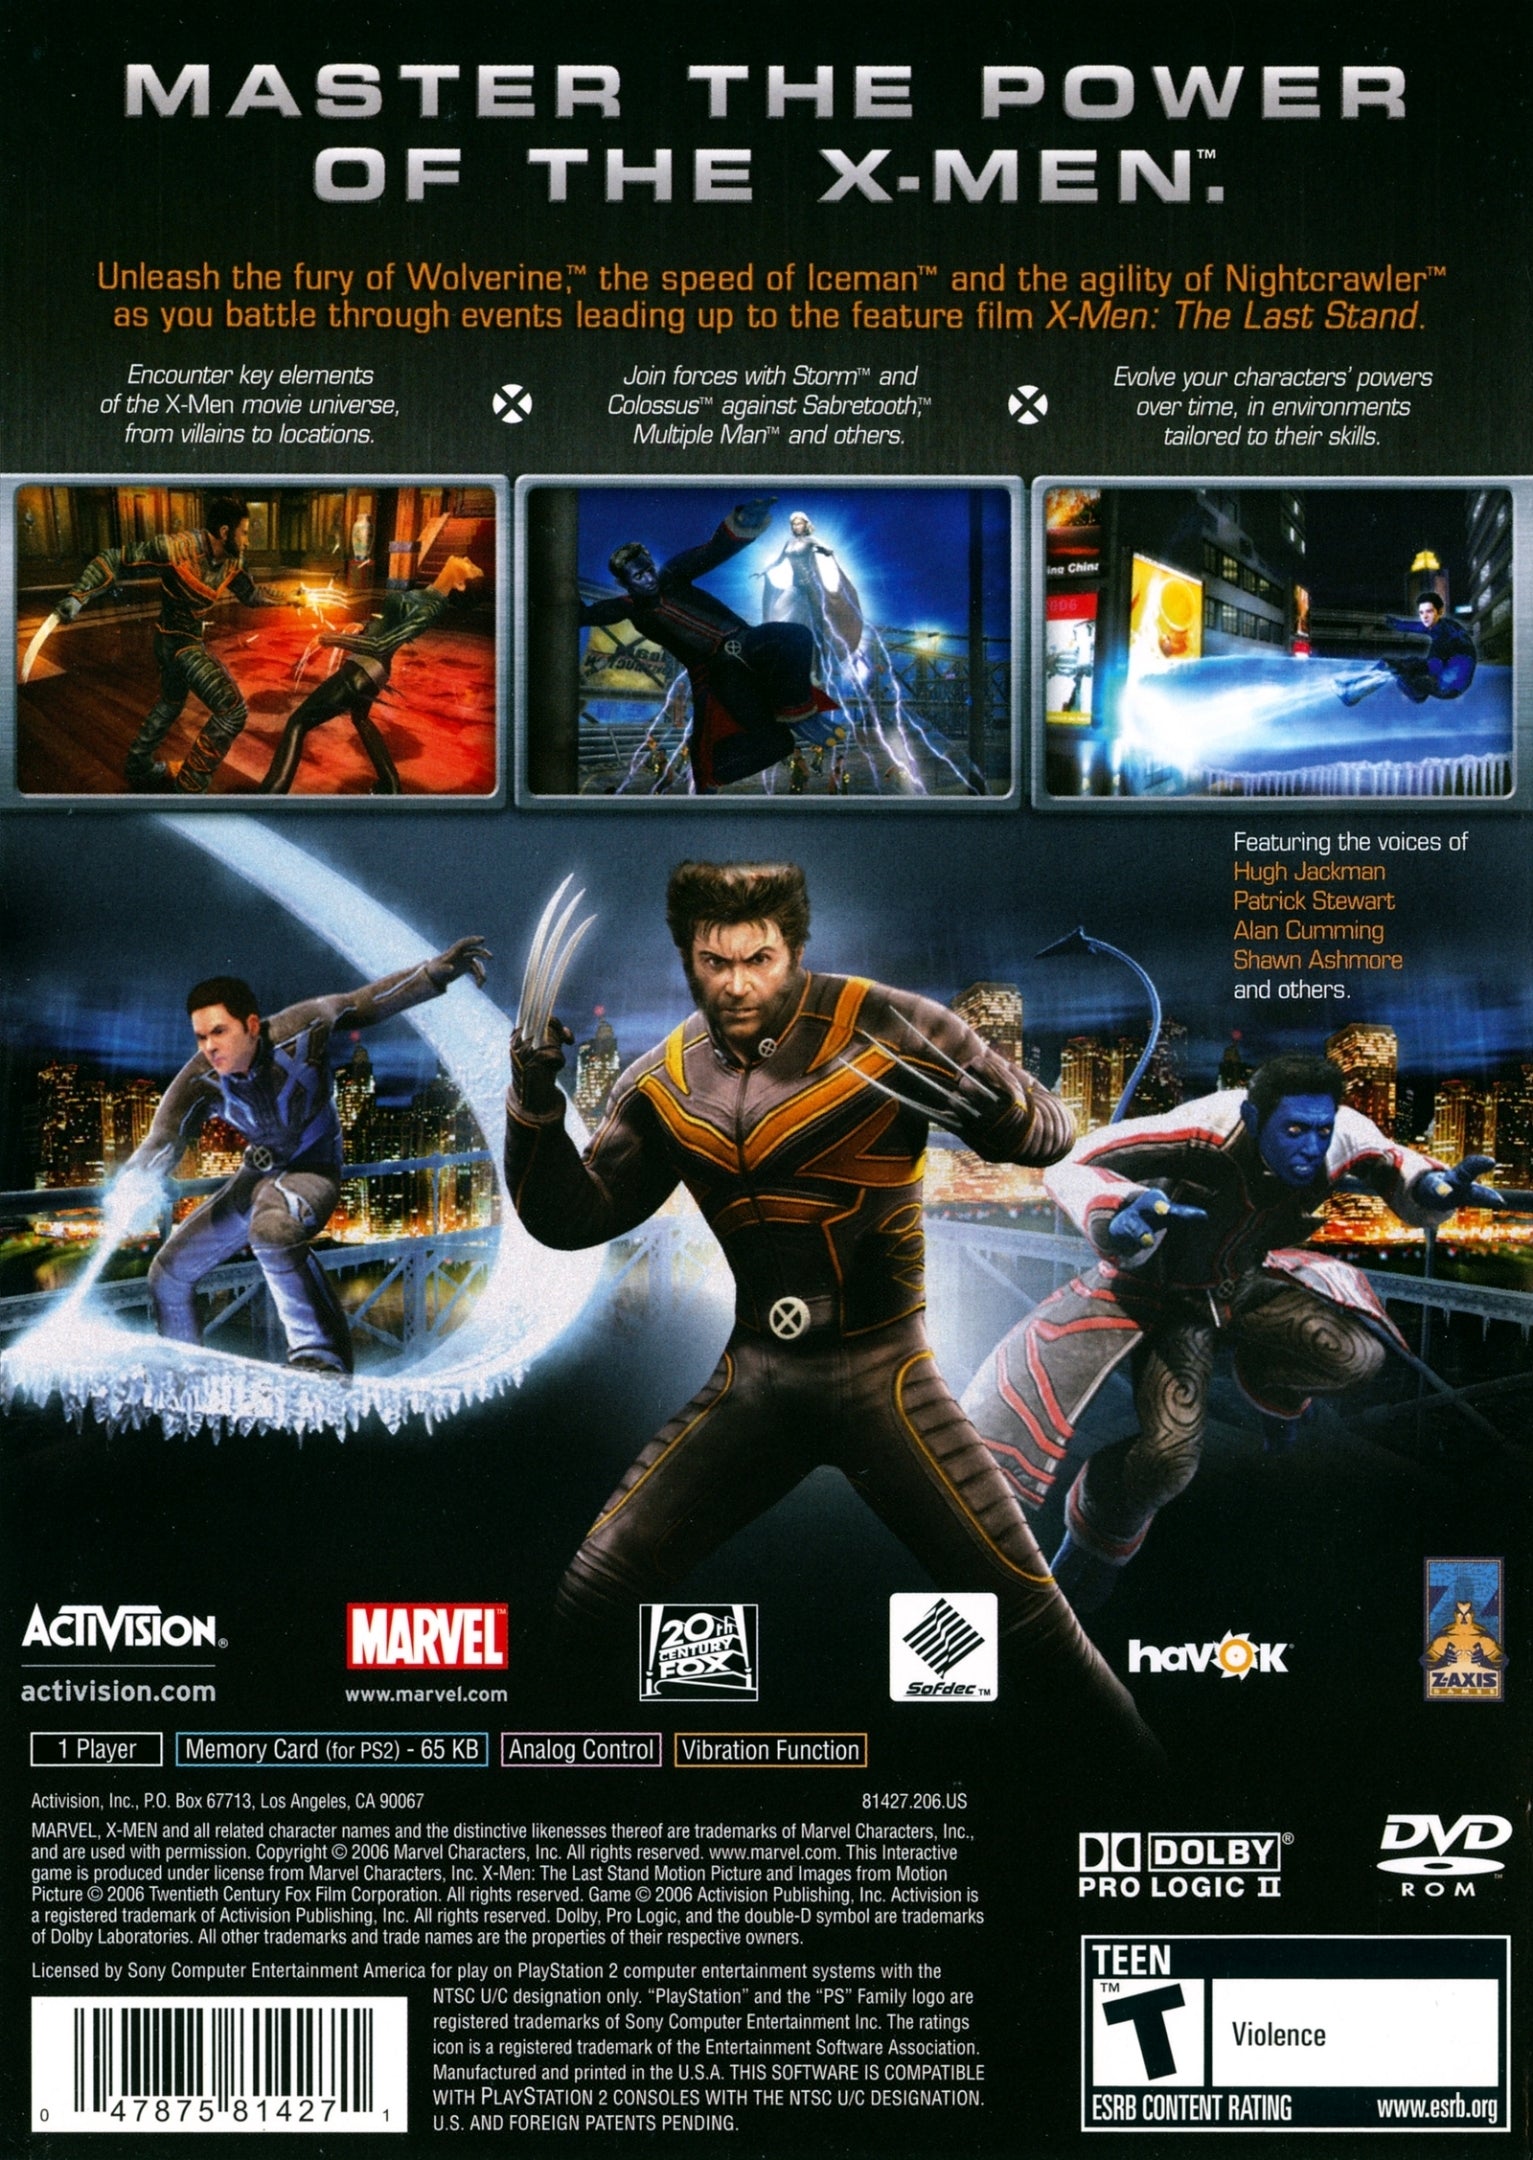 X-Men: The Official Game - (PS2) PlayStation 2 [Pre-Owned] Video Games Activision   